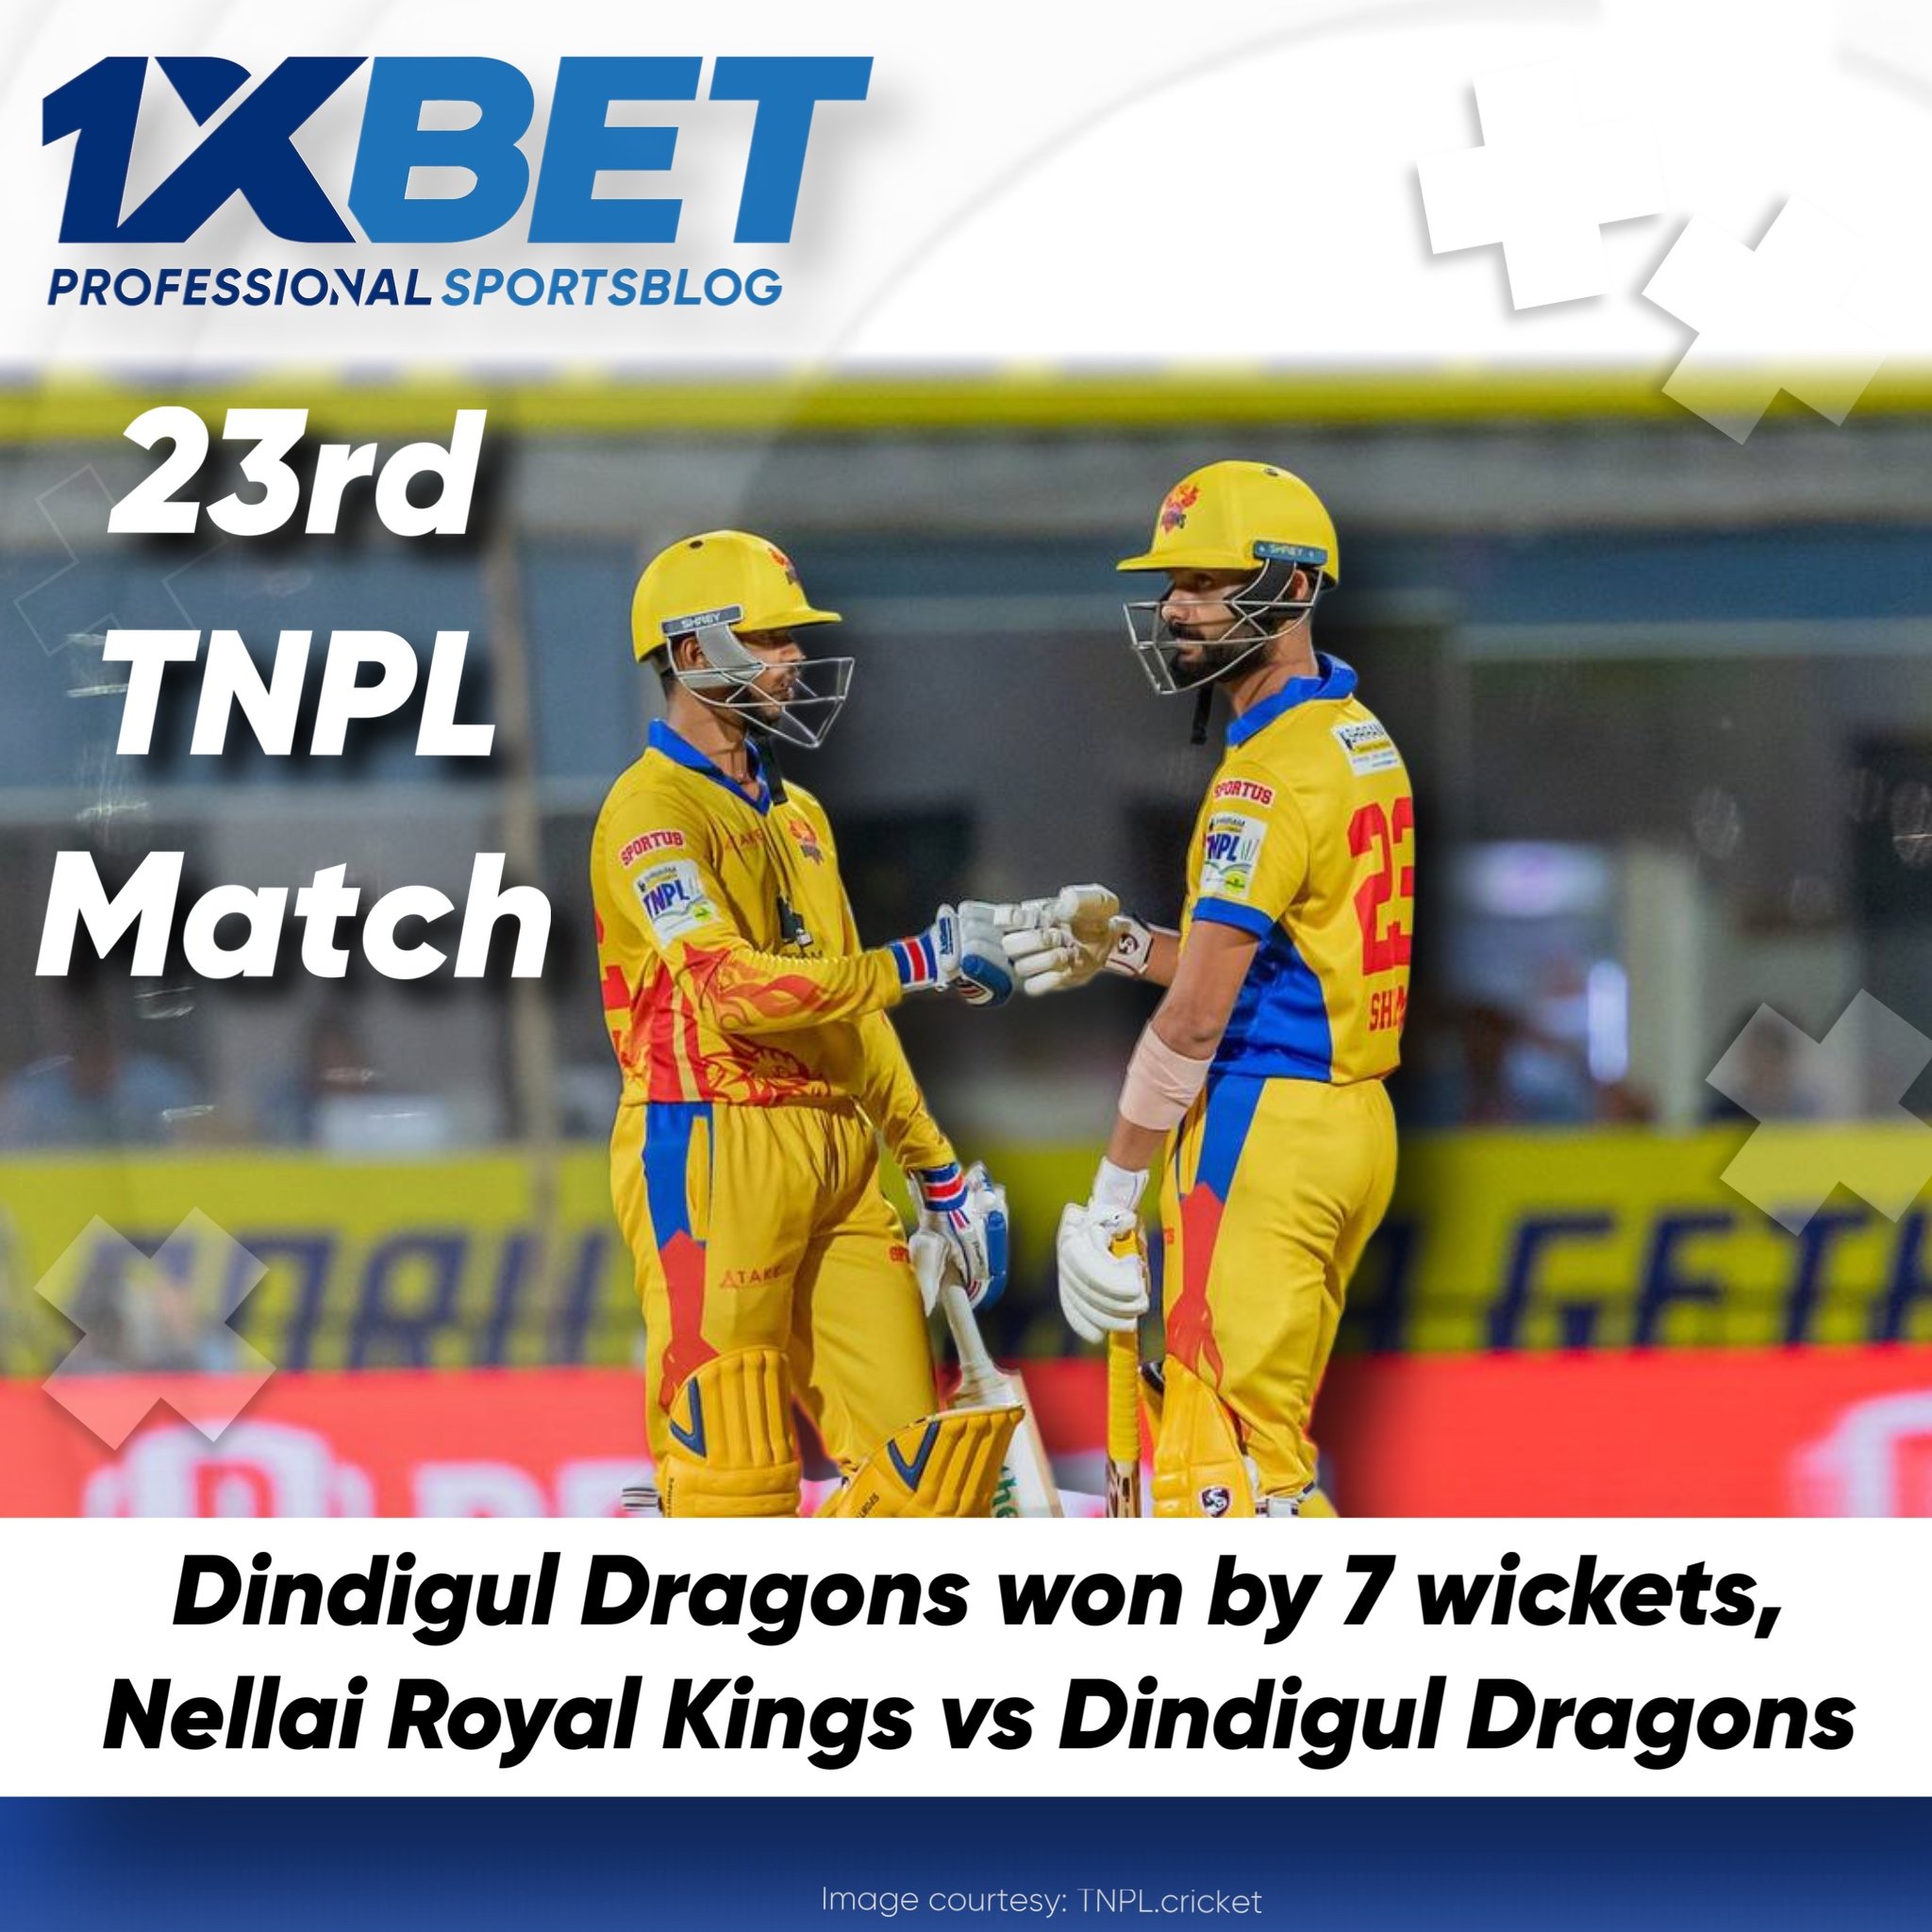 Dindigul Dragons won by 7 wickets